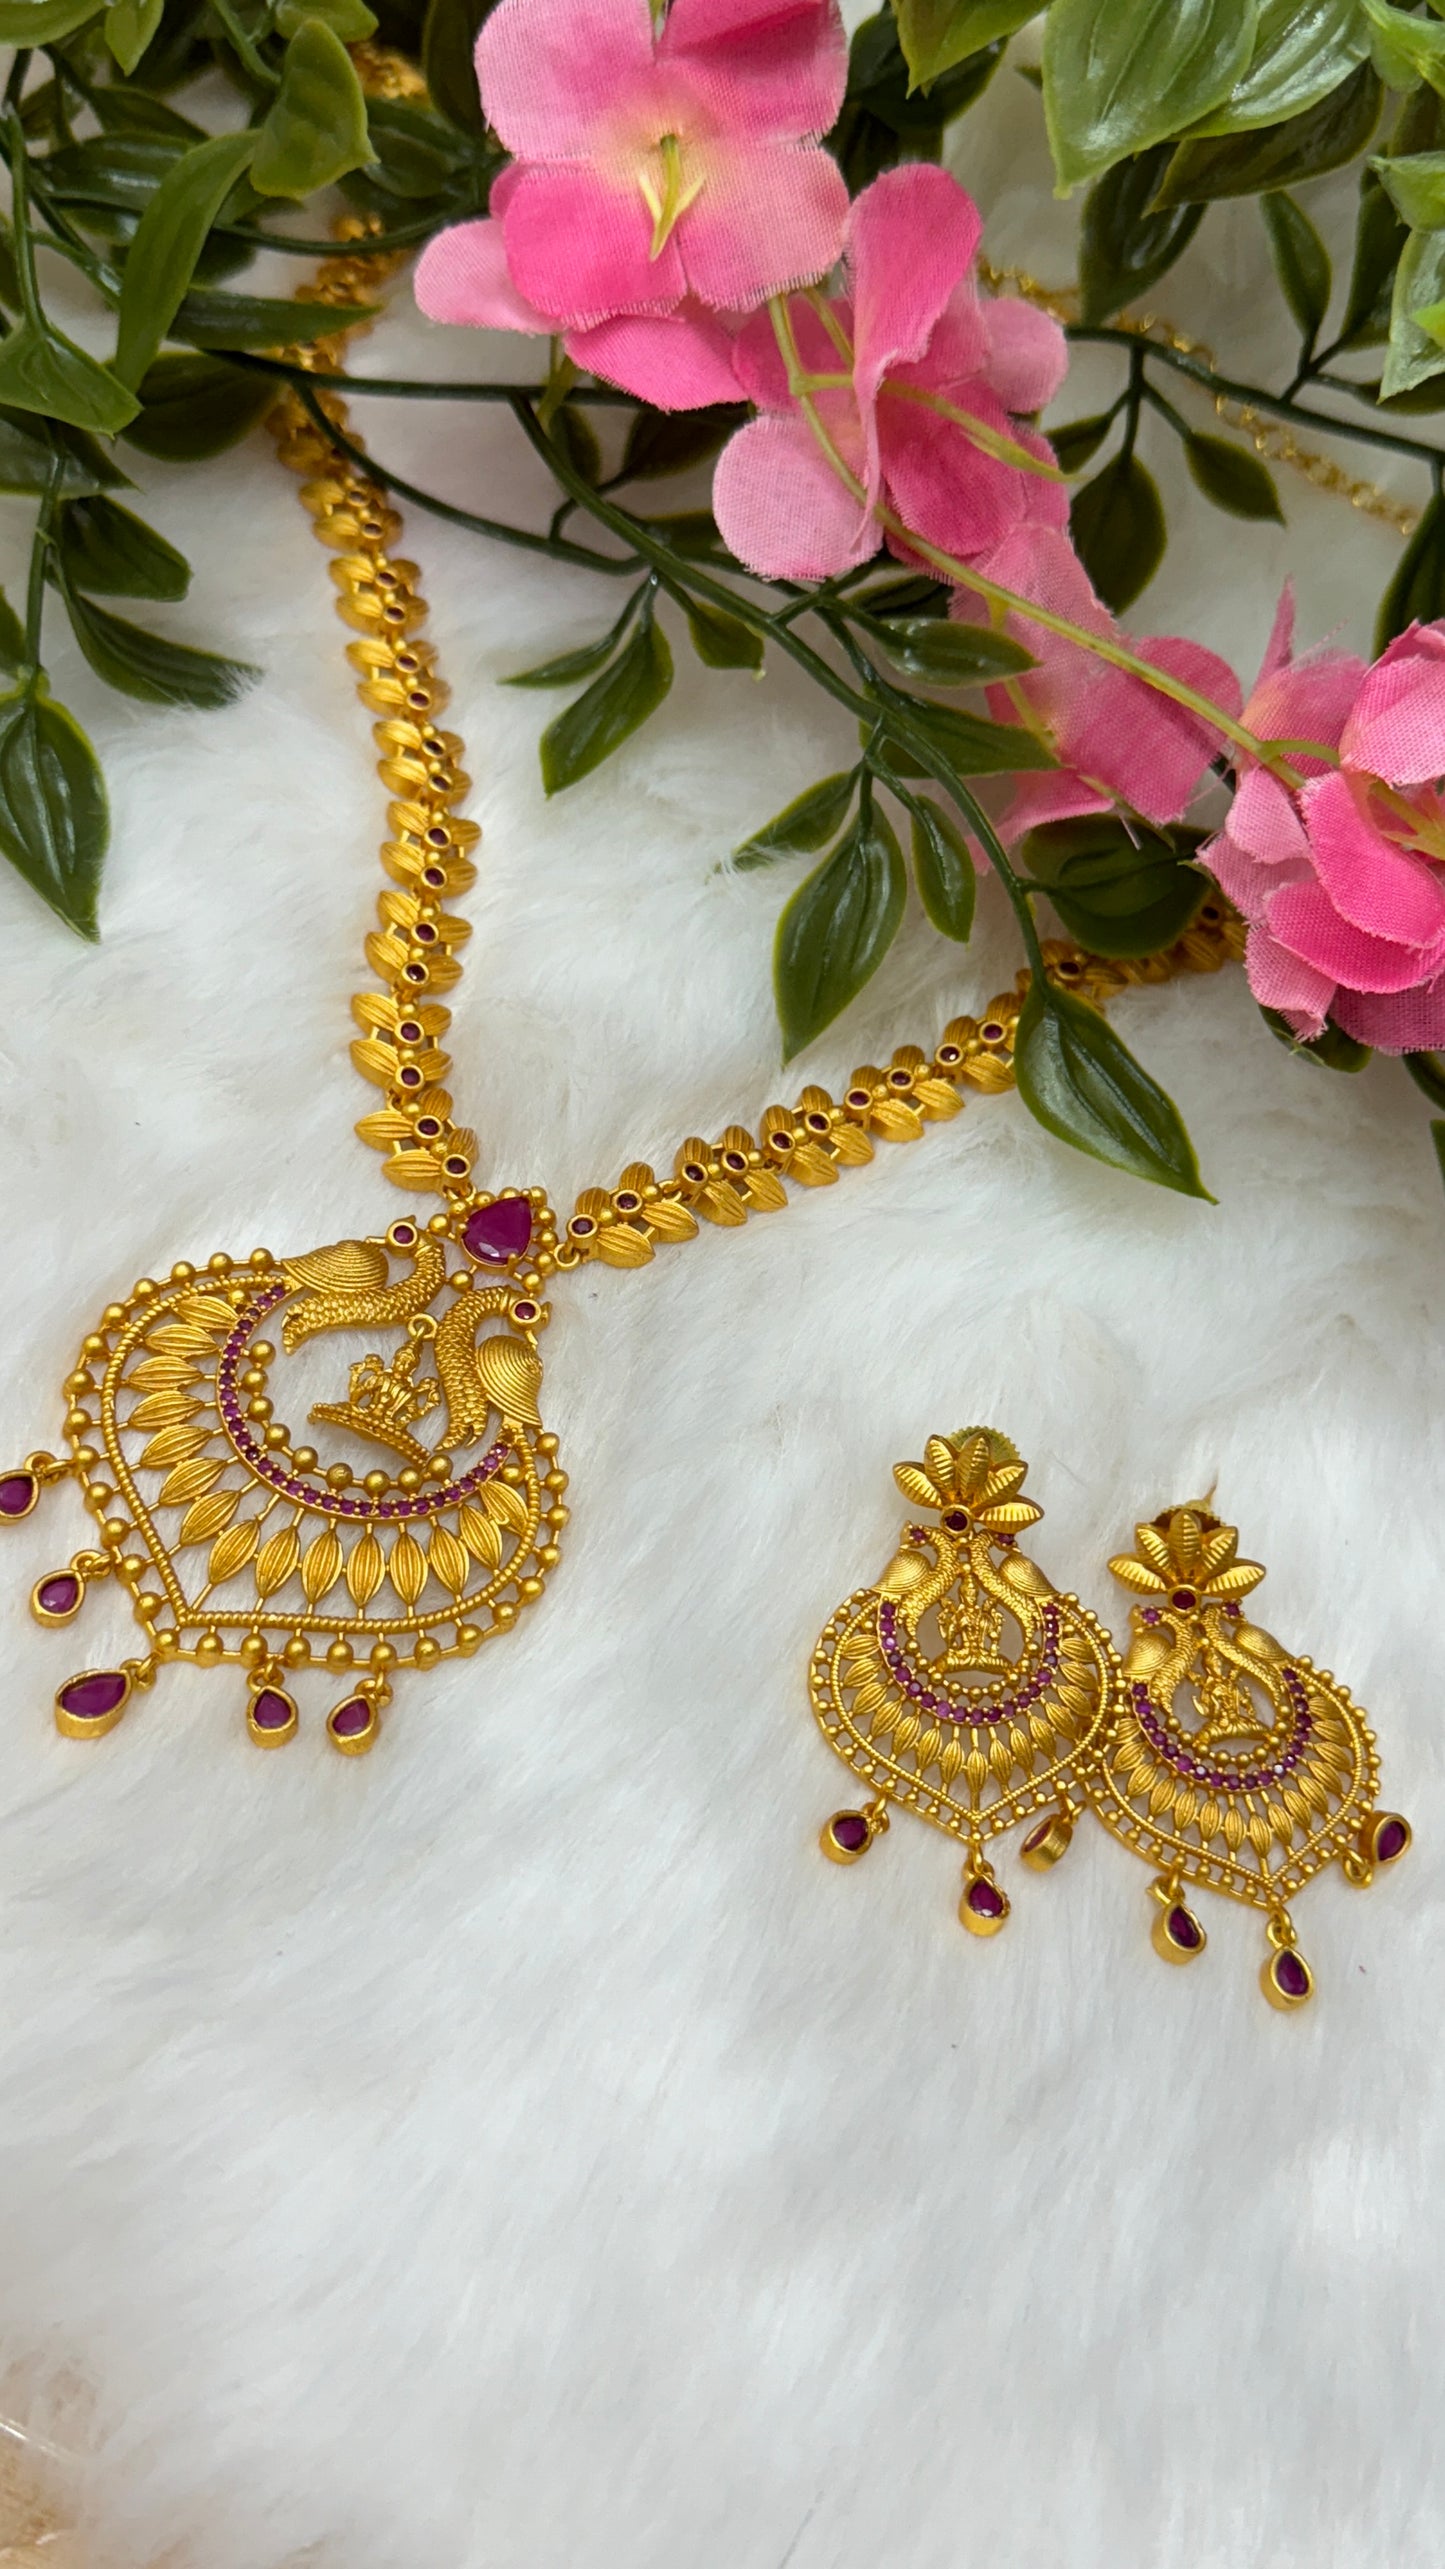 Beautiful and Exquisite Haram jewelry